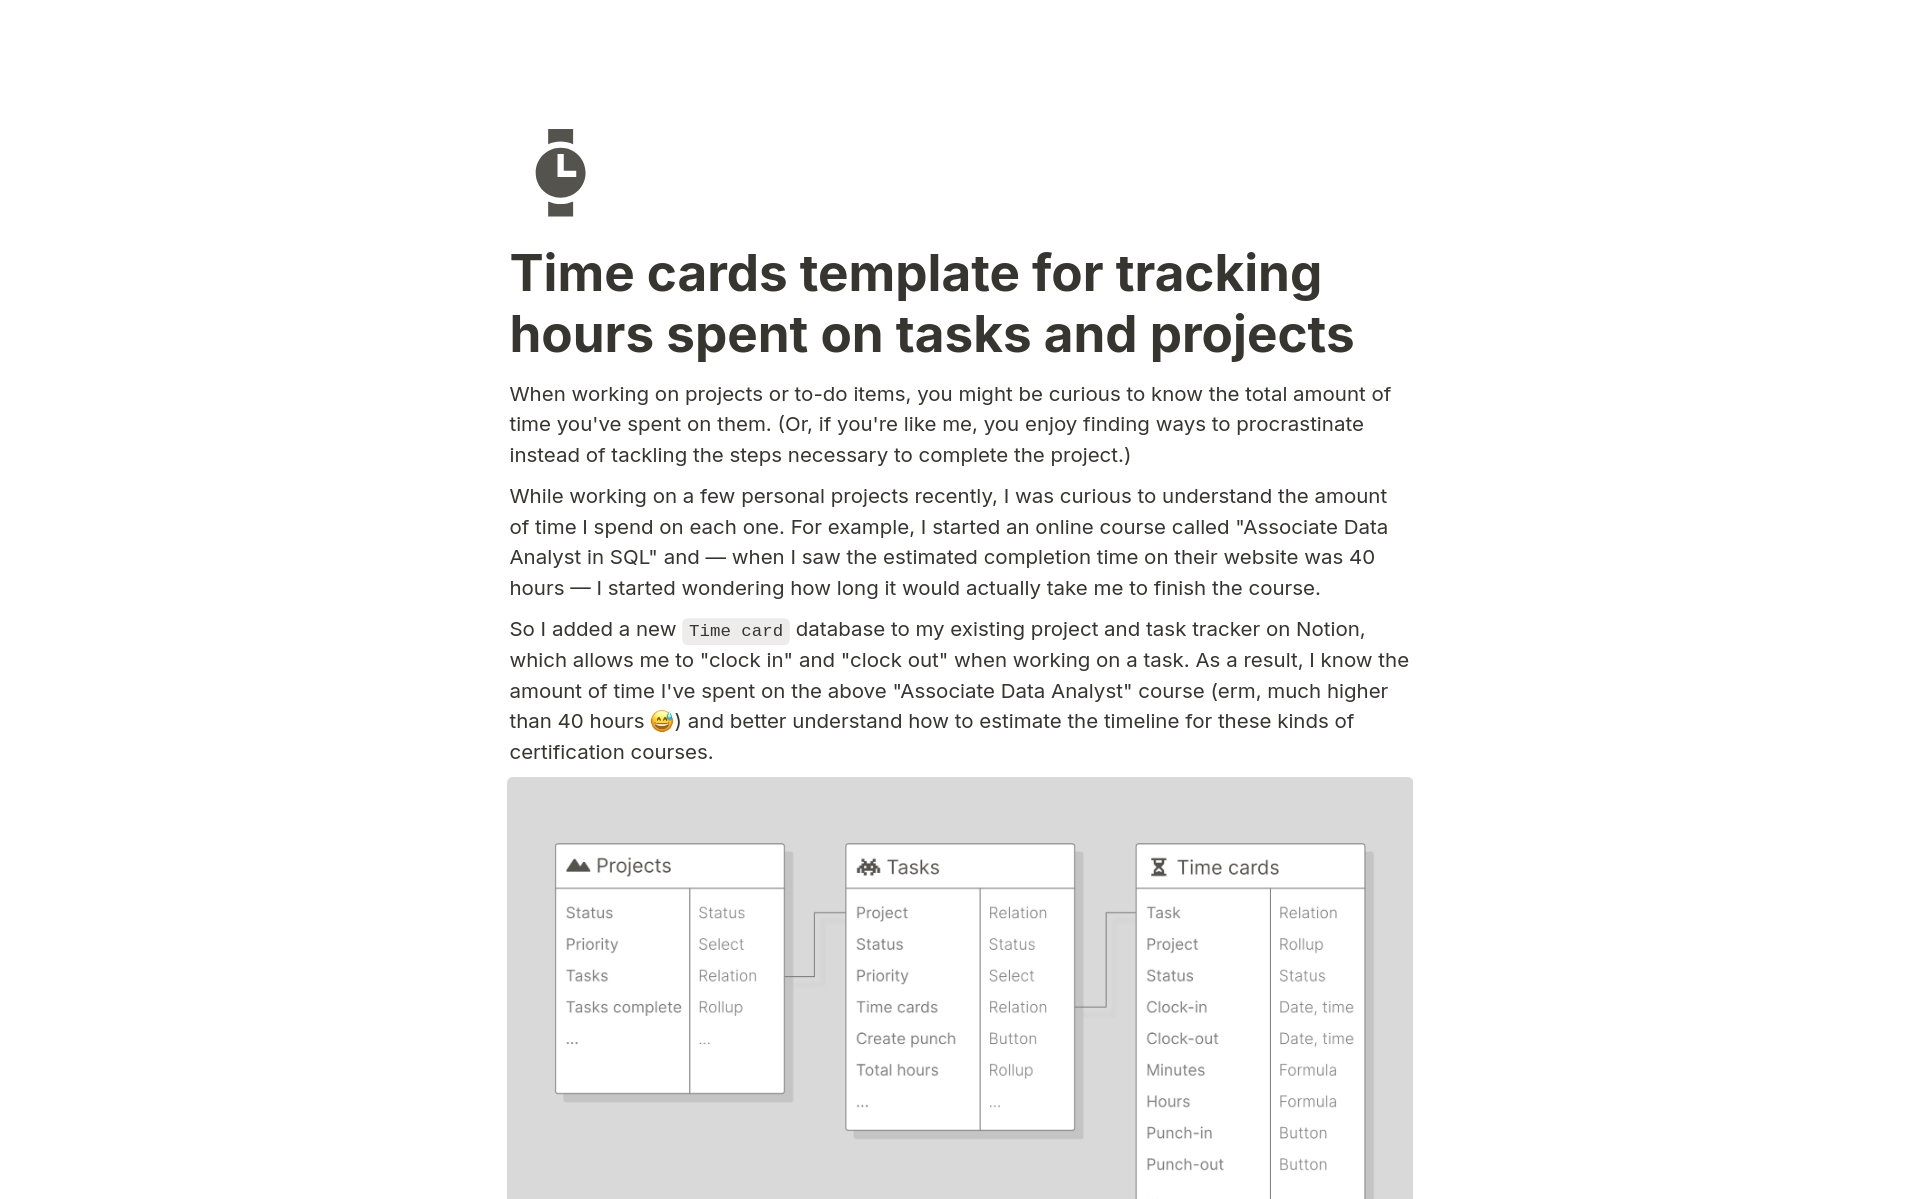 Mallin esikatselu nimelle Time cards for tracking hours spent on projects